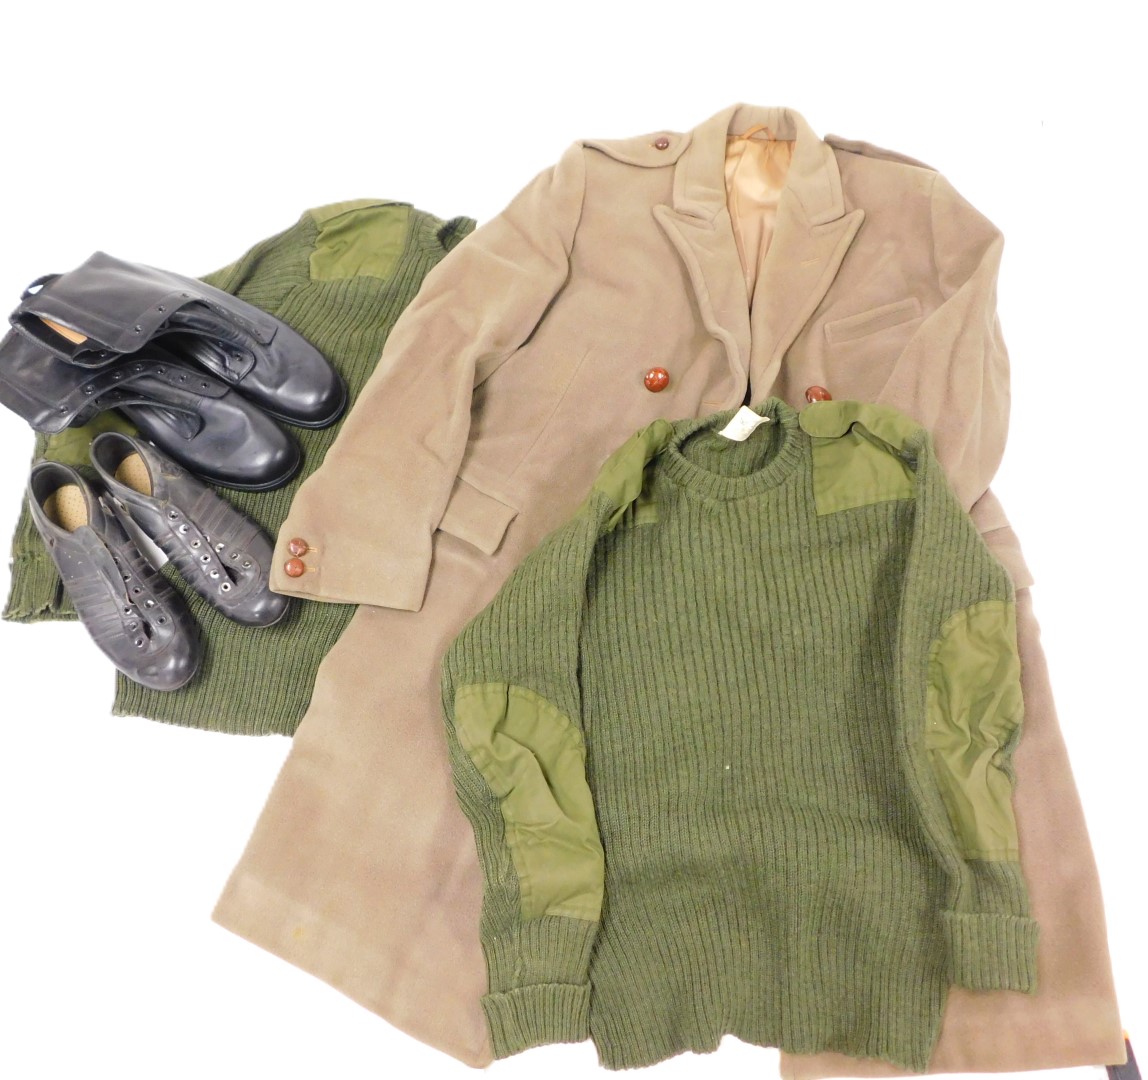 Various RAF related and other items, a kit bag, green jacket, various footwear, boots, overcoat, etc